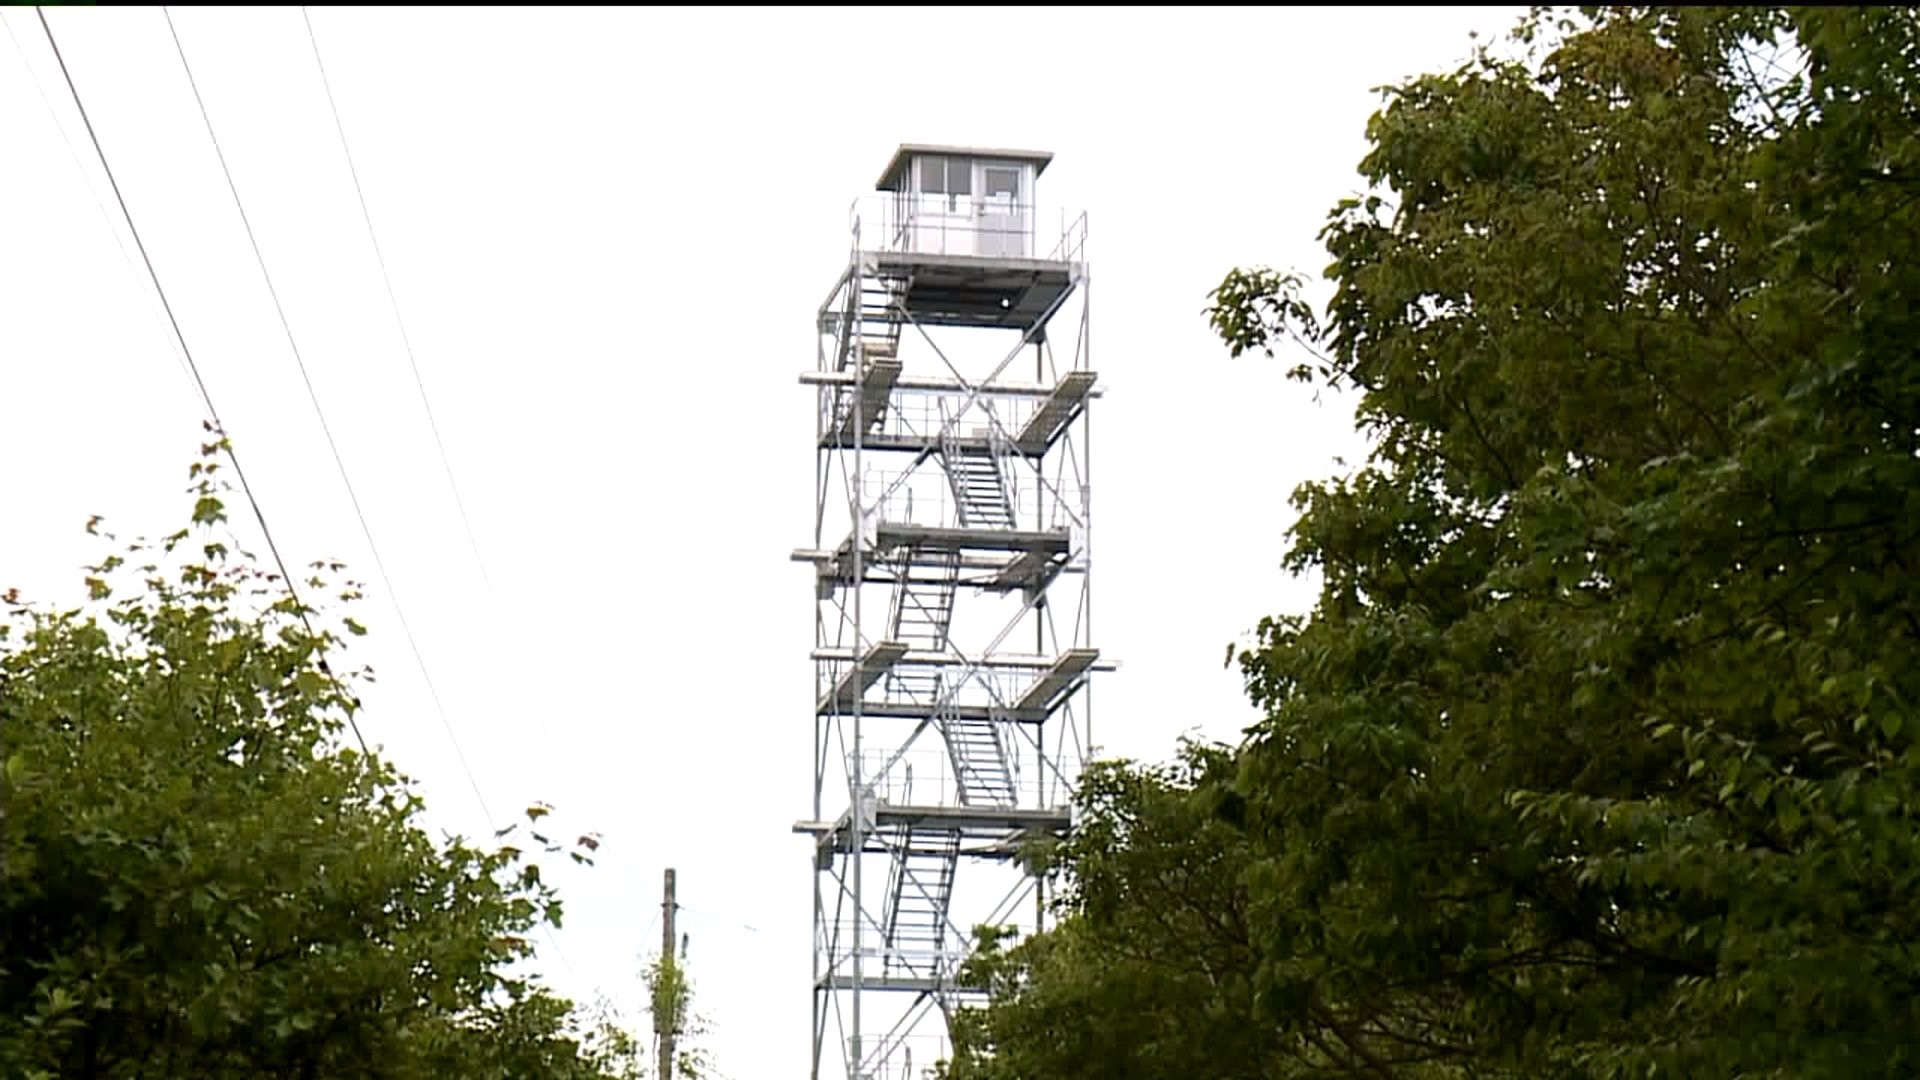 New Fire Tower in Place in Carbon County